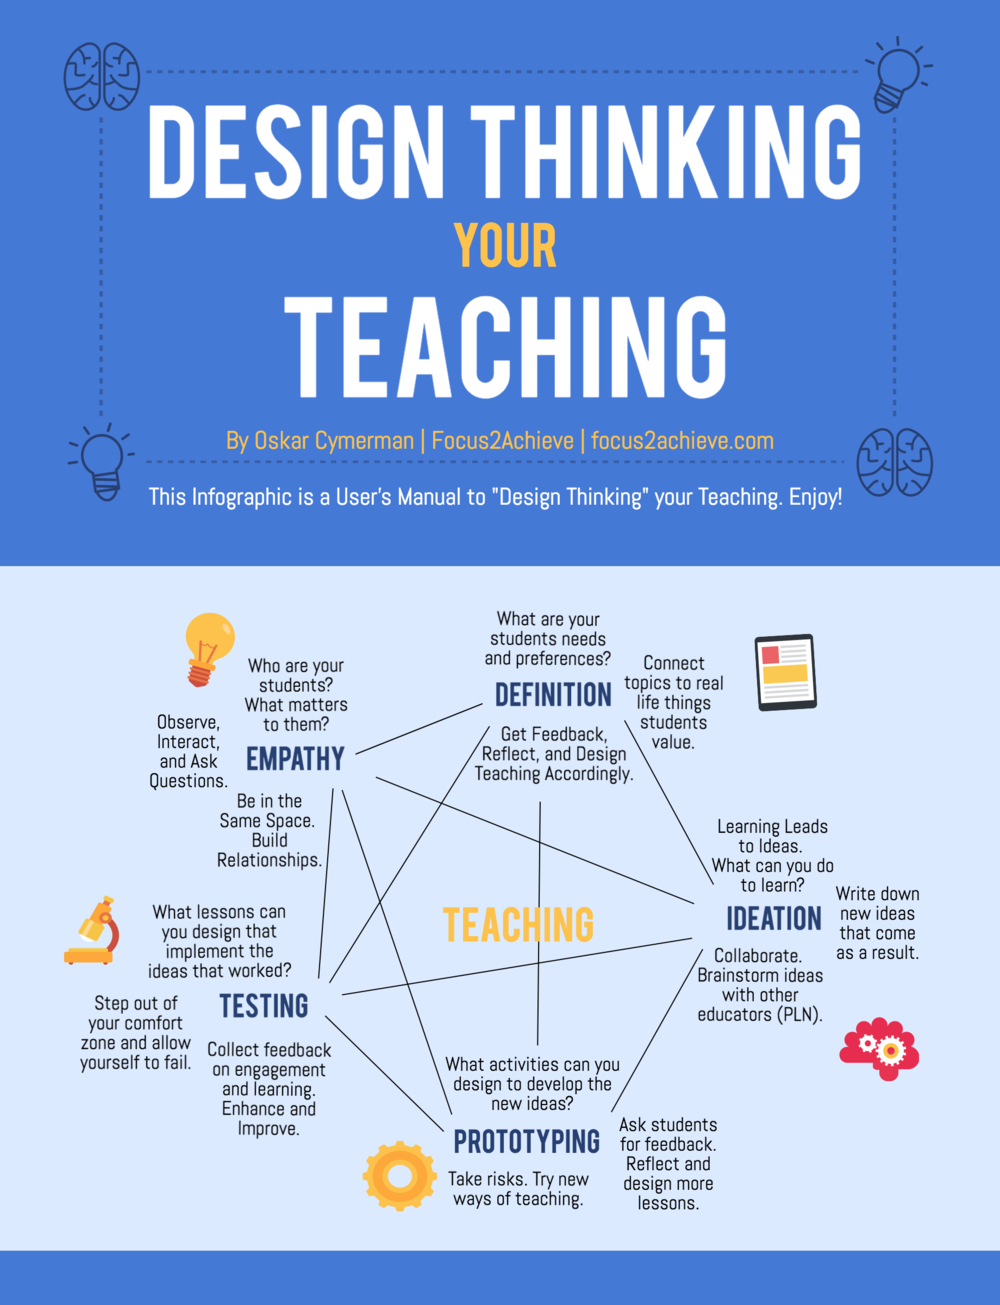 The User's Manual To Design Thinking Your Teaching (Infographic)